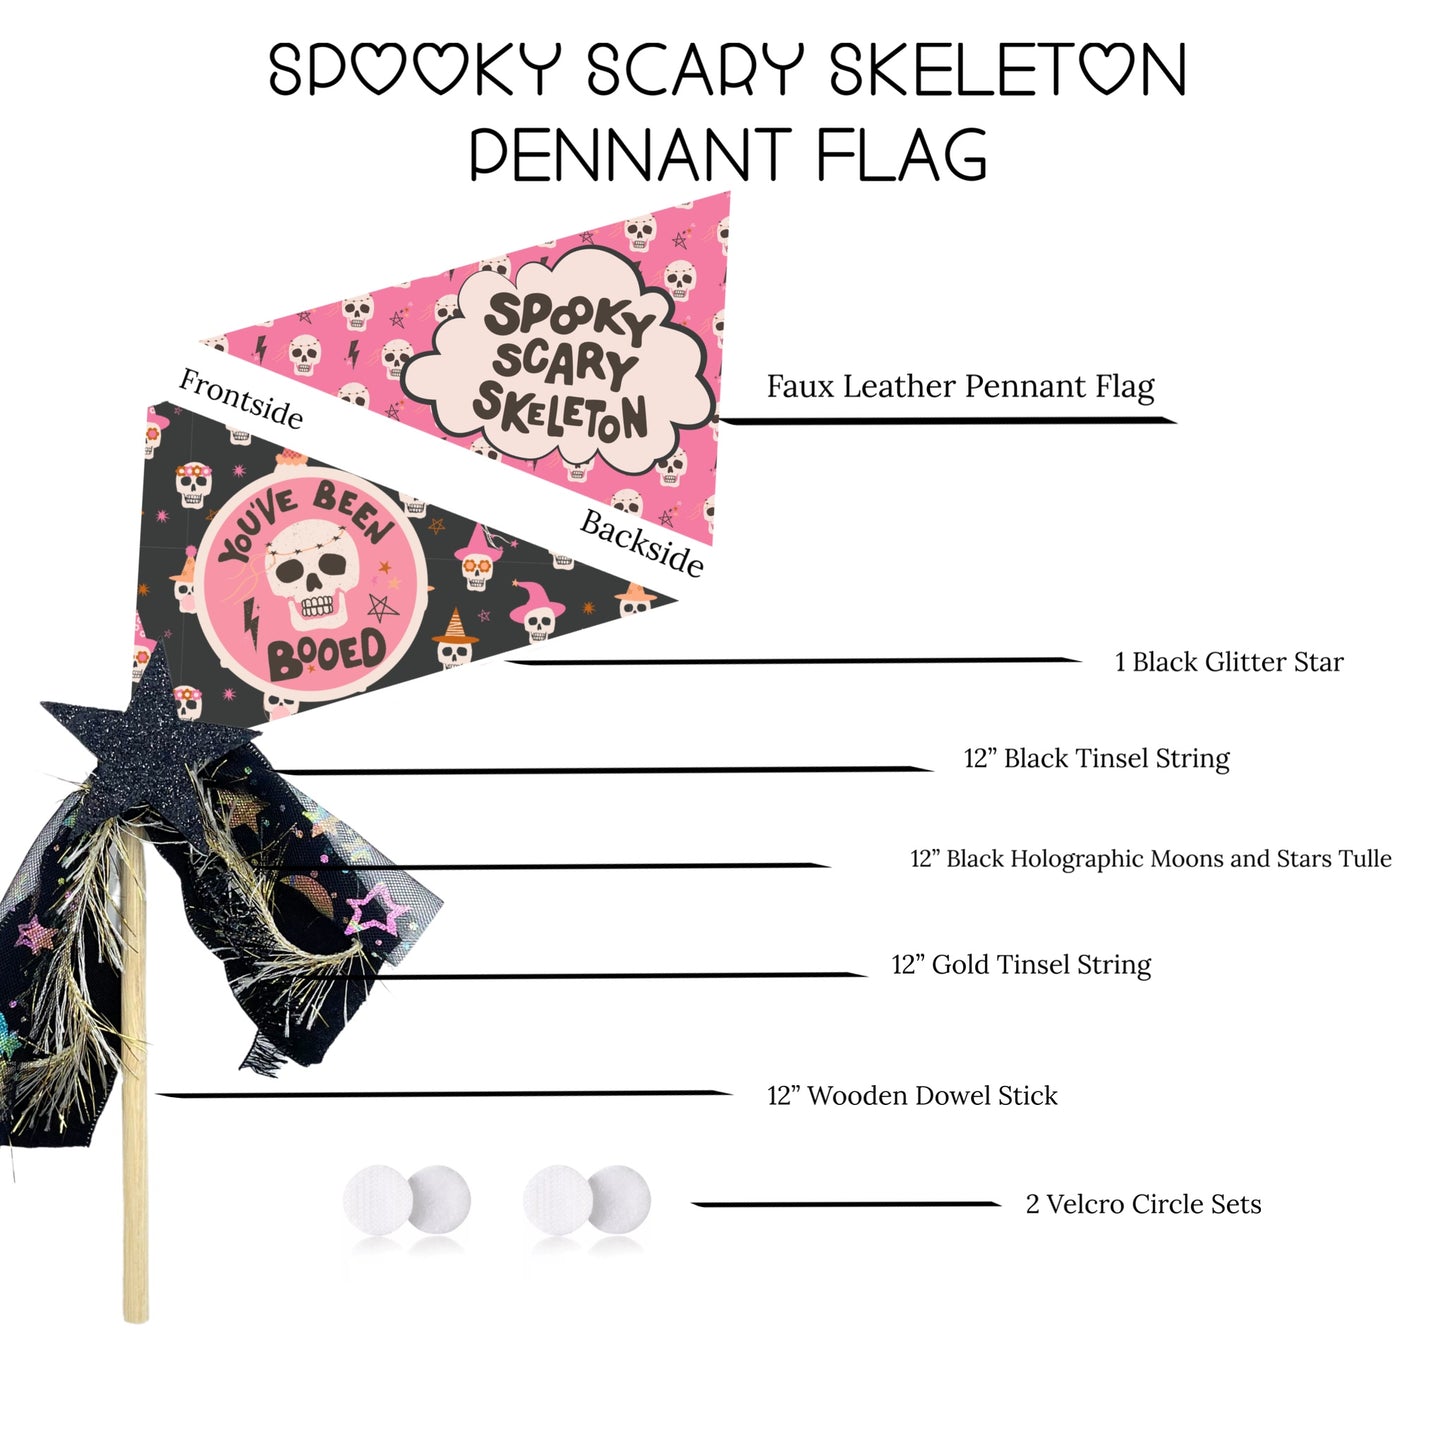 Spooky Scary Skeleton Booed Faux Leather Pennant Flags - DIY